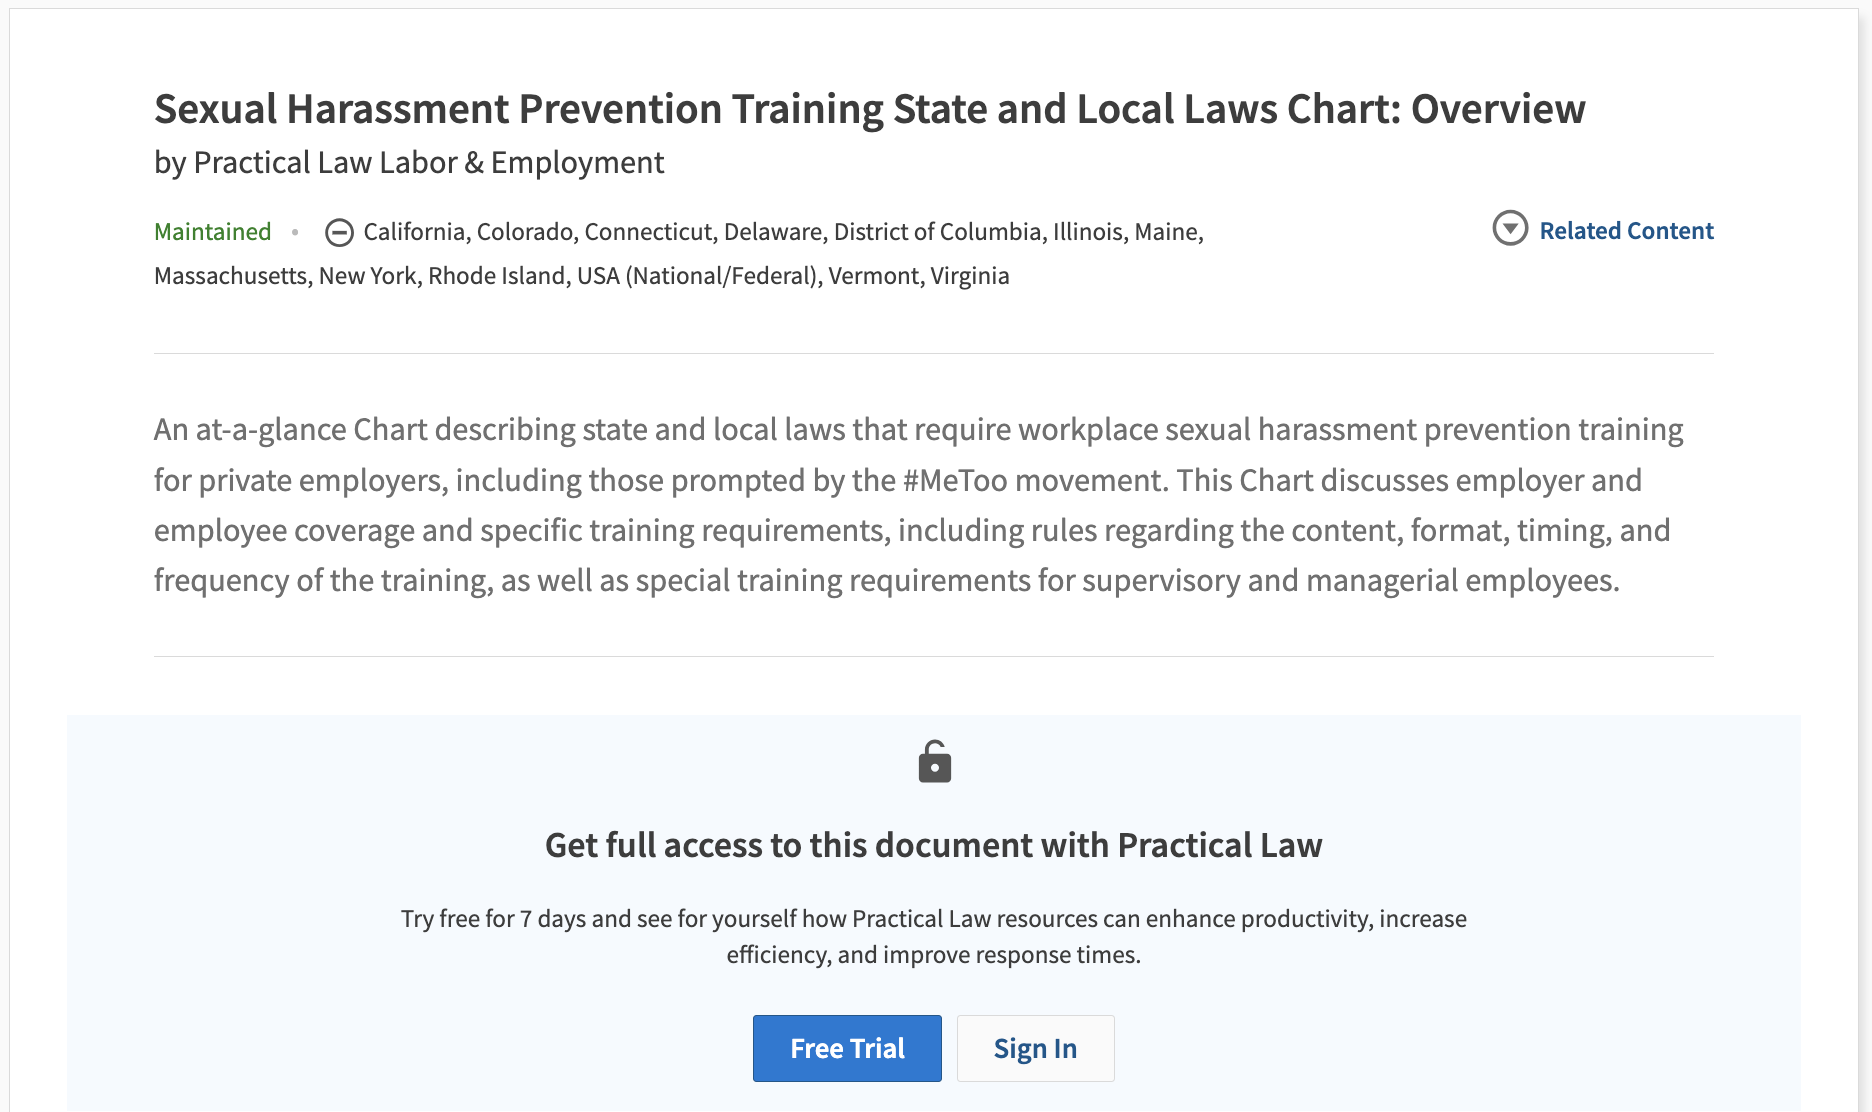 Overview page showing list of state jurisdictions covered in this practice note